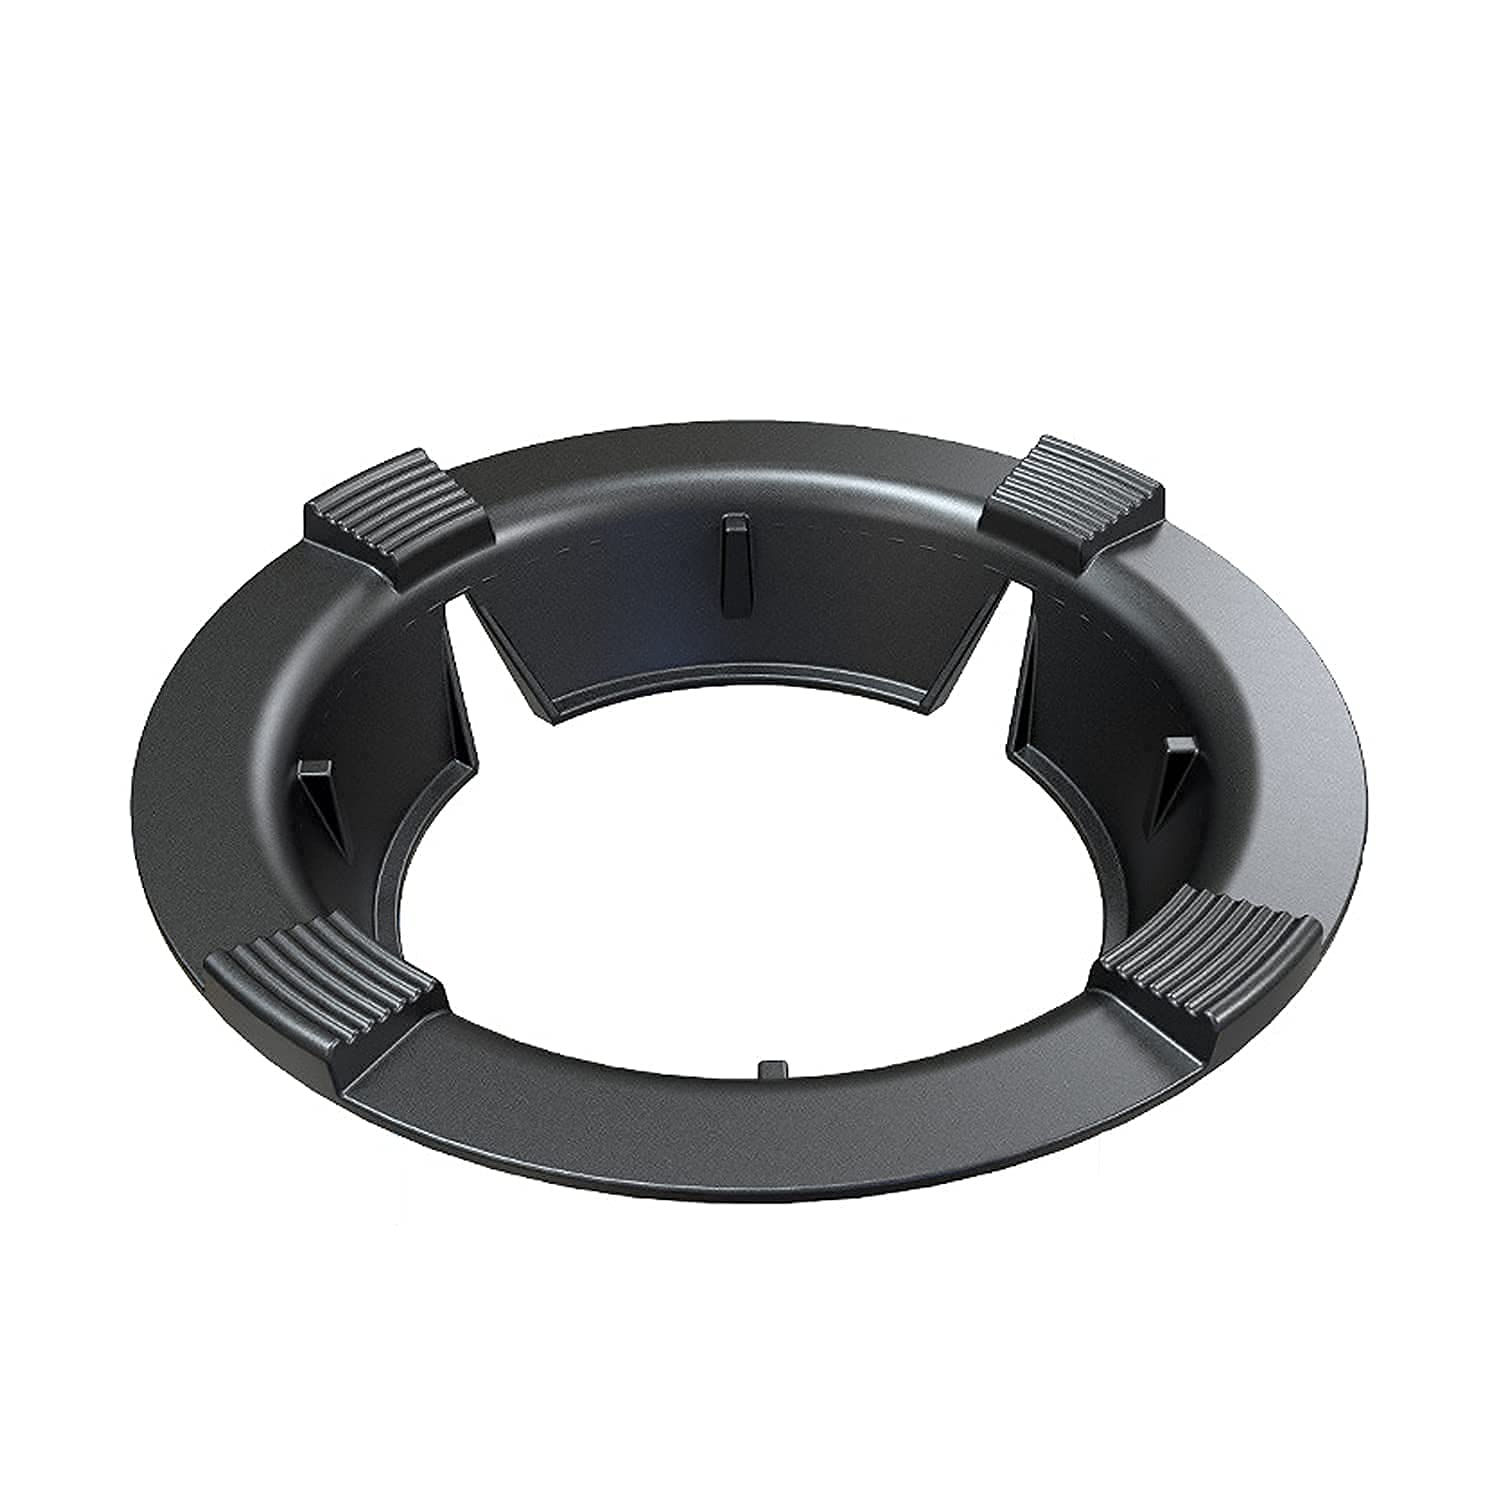 NAZYSAP Wok Ring for gas Stove, Four-claw Wok Rack Made of cast Iron Material-Wok Stand Stable and not ShakingA